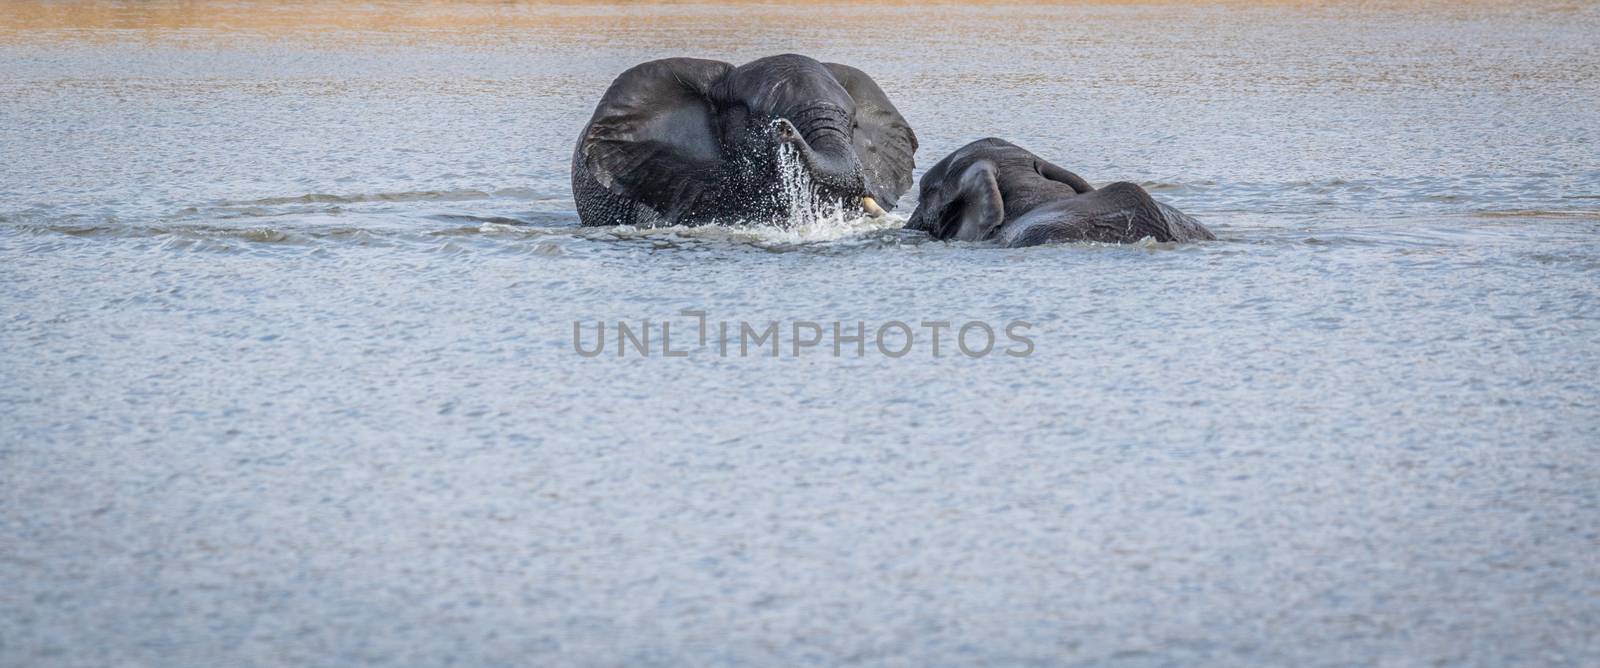 Two Elephants playing in the water in the Kruger. by Simoneemanphotography